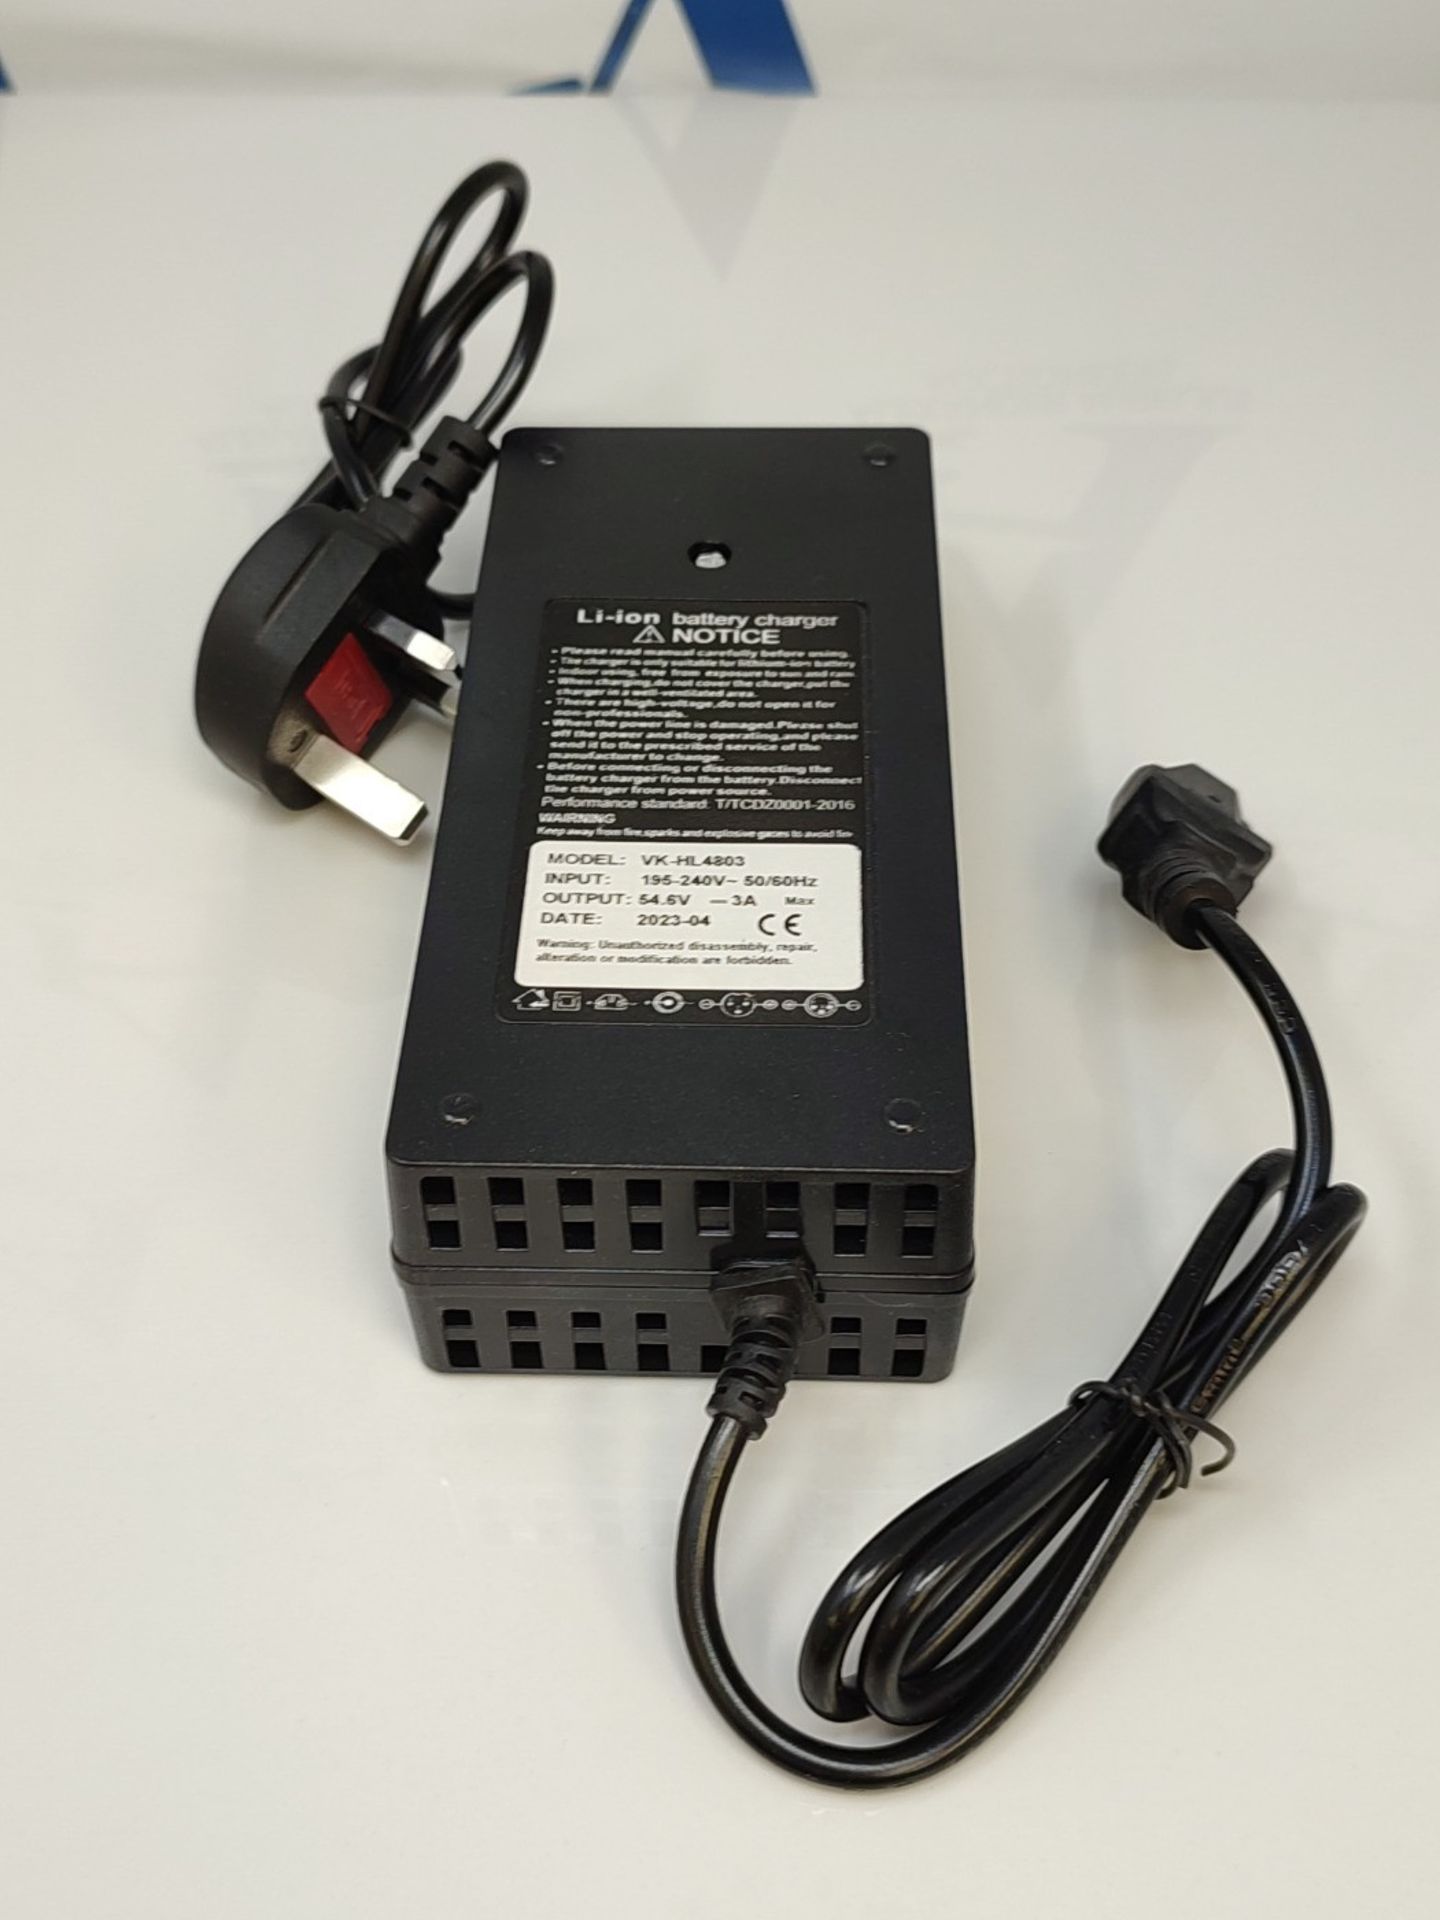 HSJCZMD Multi-specification Charger Power,42V/1.8Alithium Battery Charger,7 Kinds of P - Bild 2 aus 2